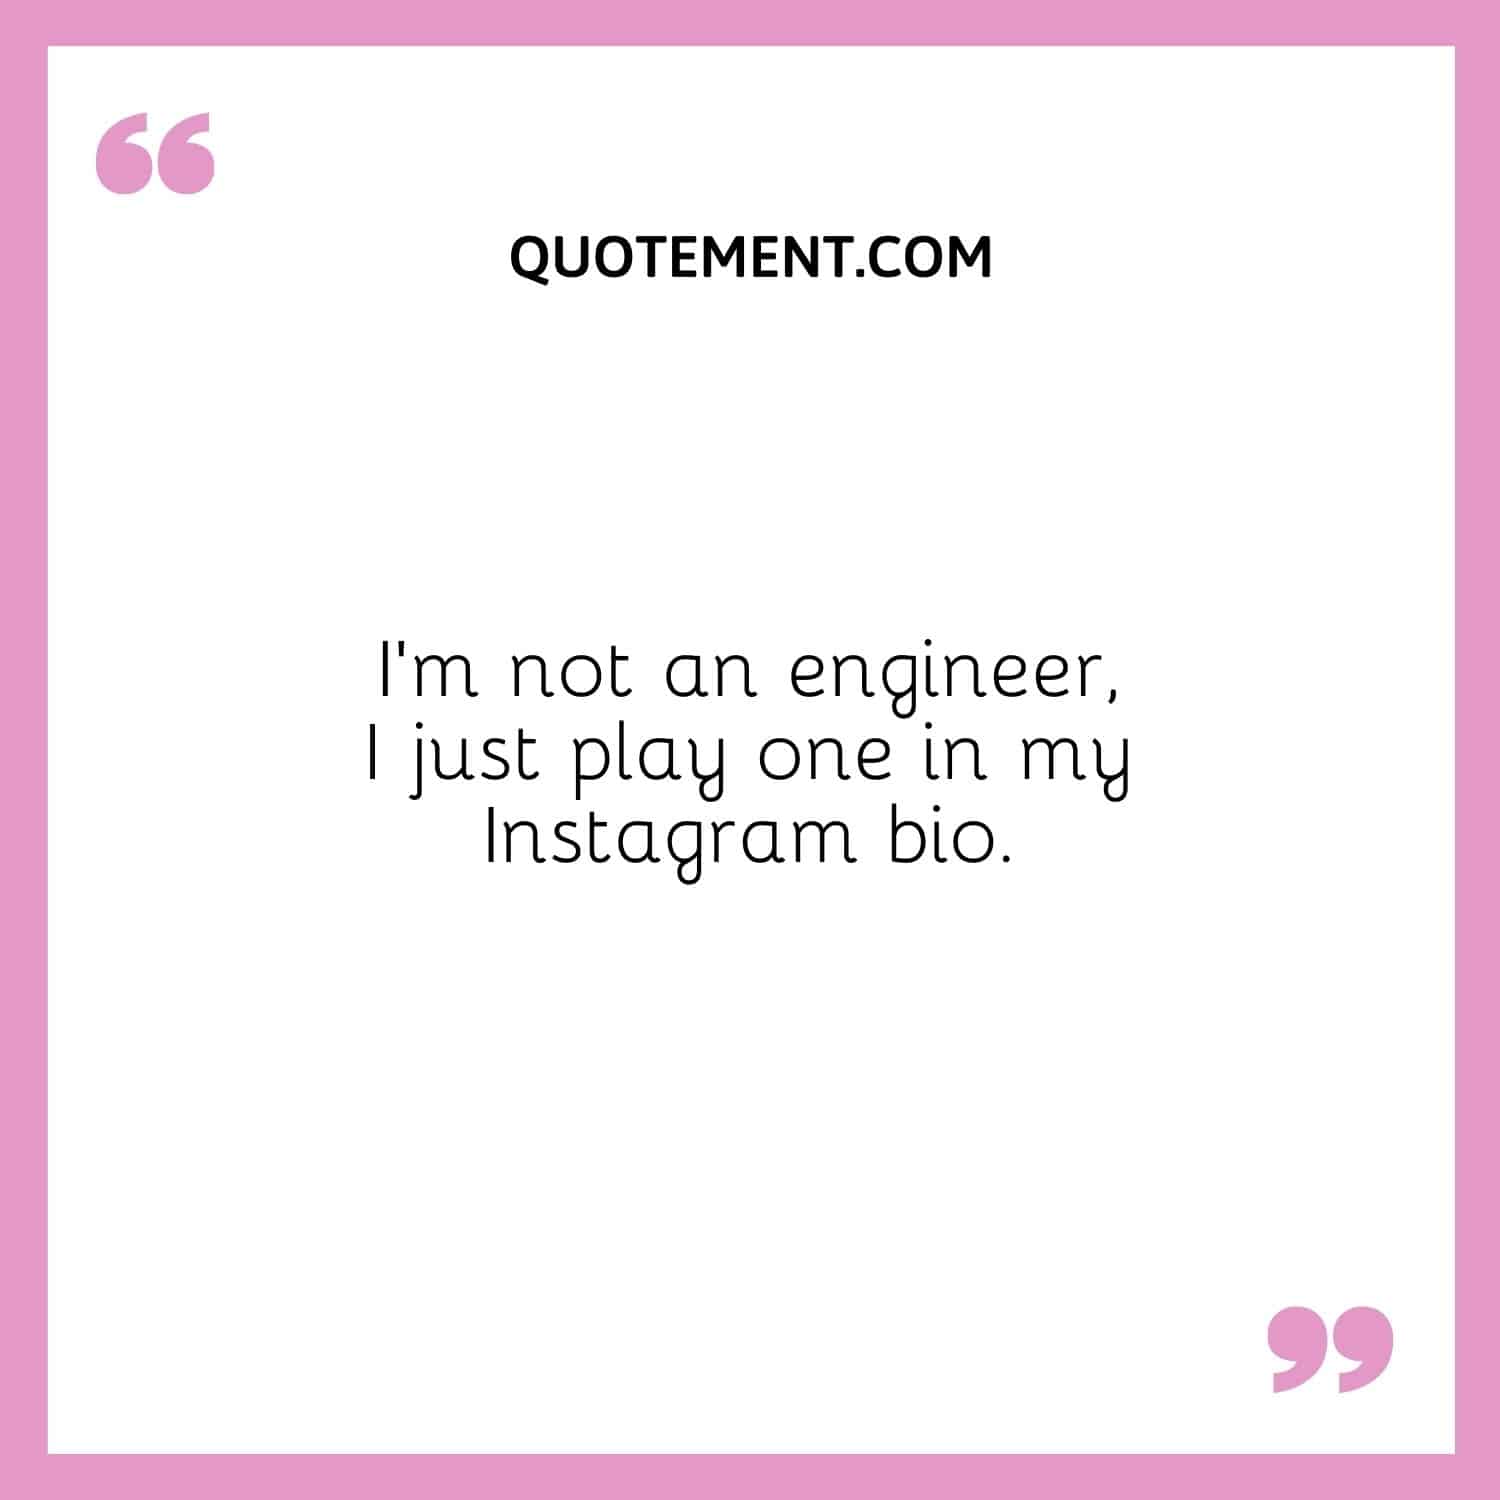 I’m not an engineer, I just play one in my Instagram bio.